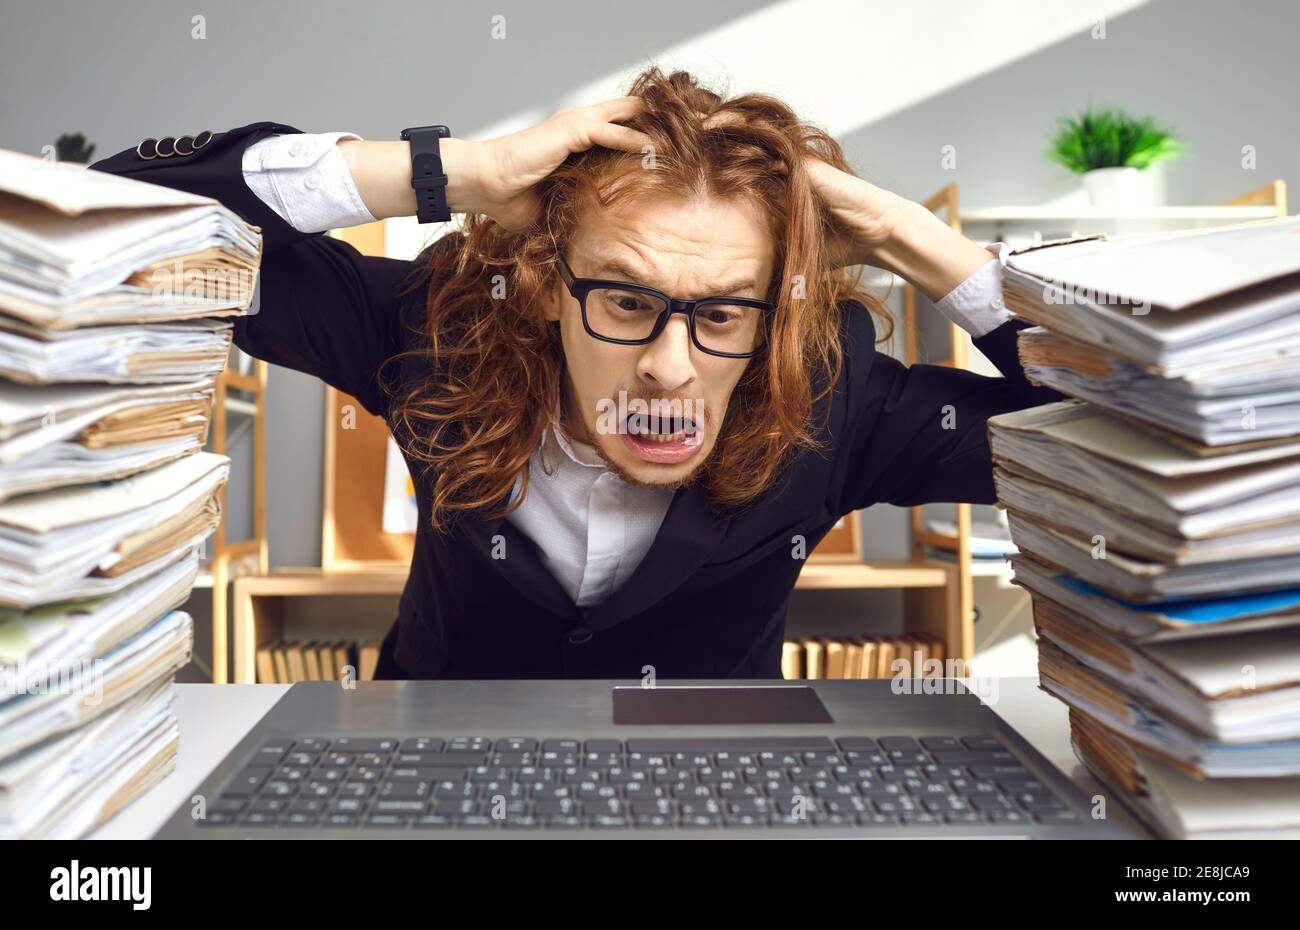 Funny man sitting at office desk with computer stressed by crazy load of paperwork Stock Photo